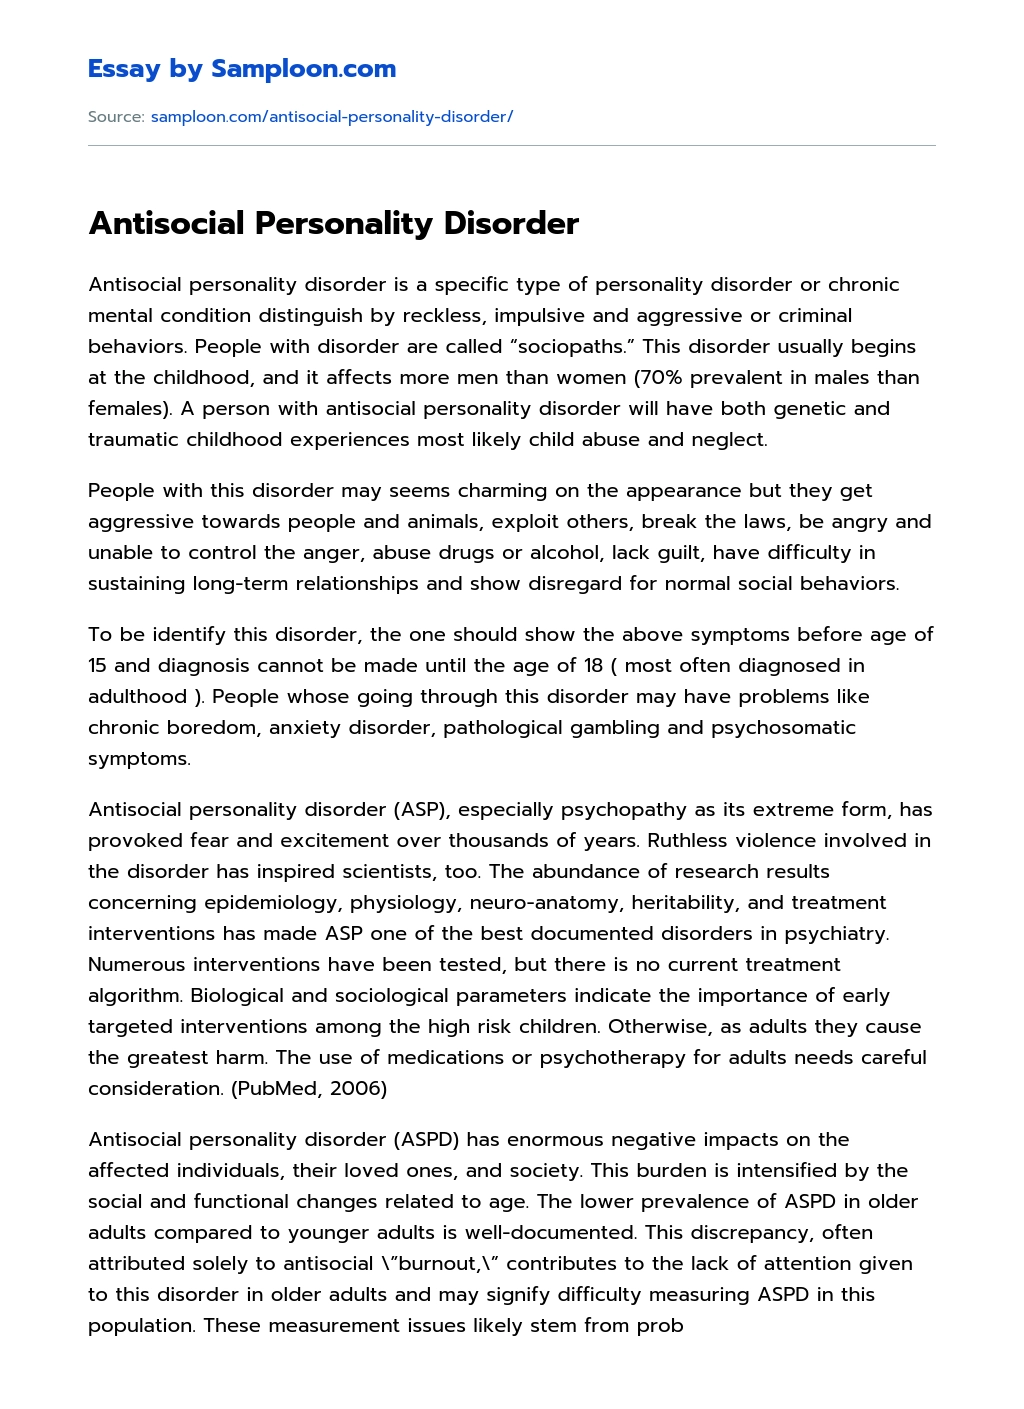 Antisocial Personality Disorder Personal Essay essay